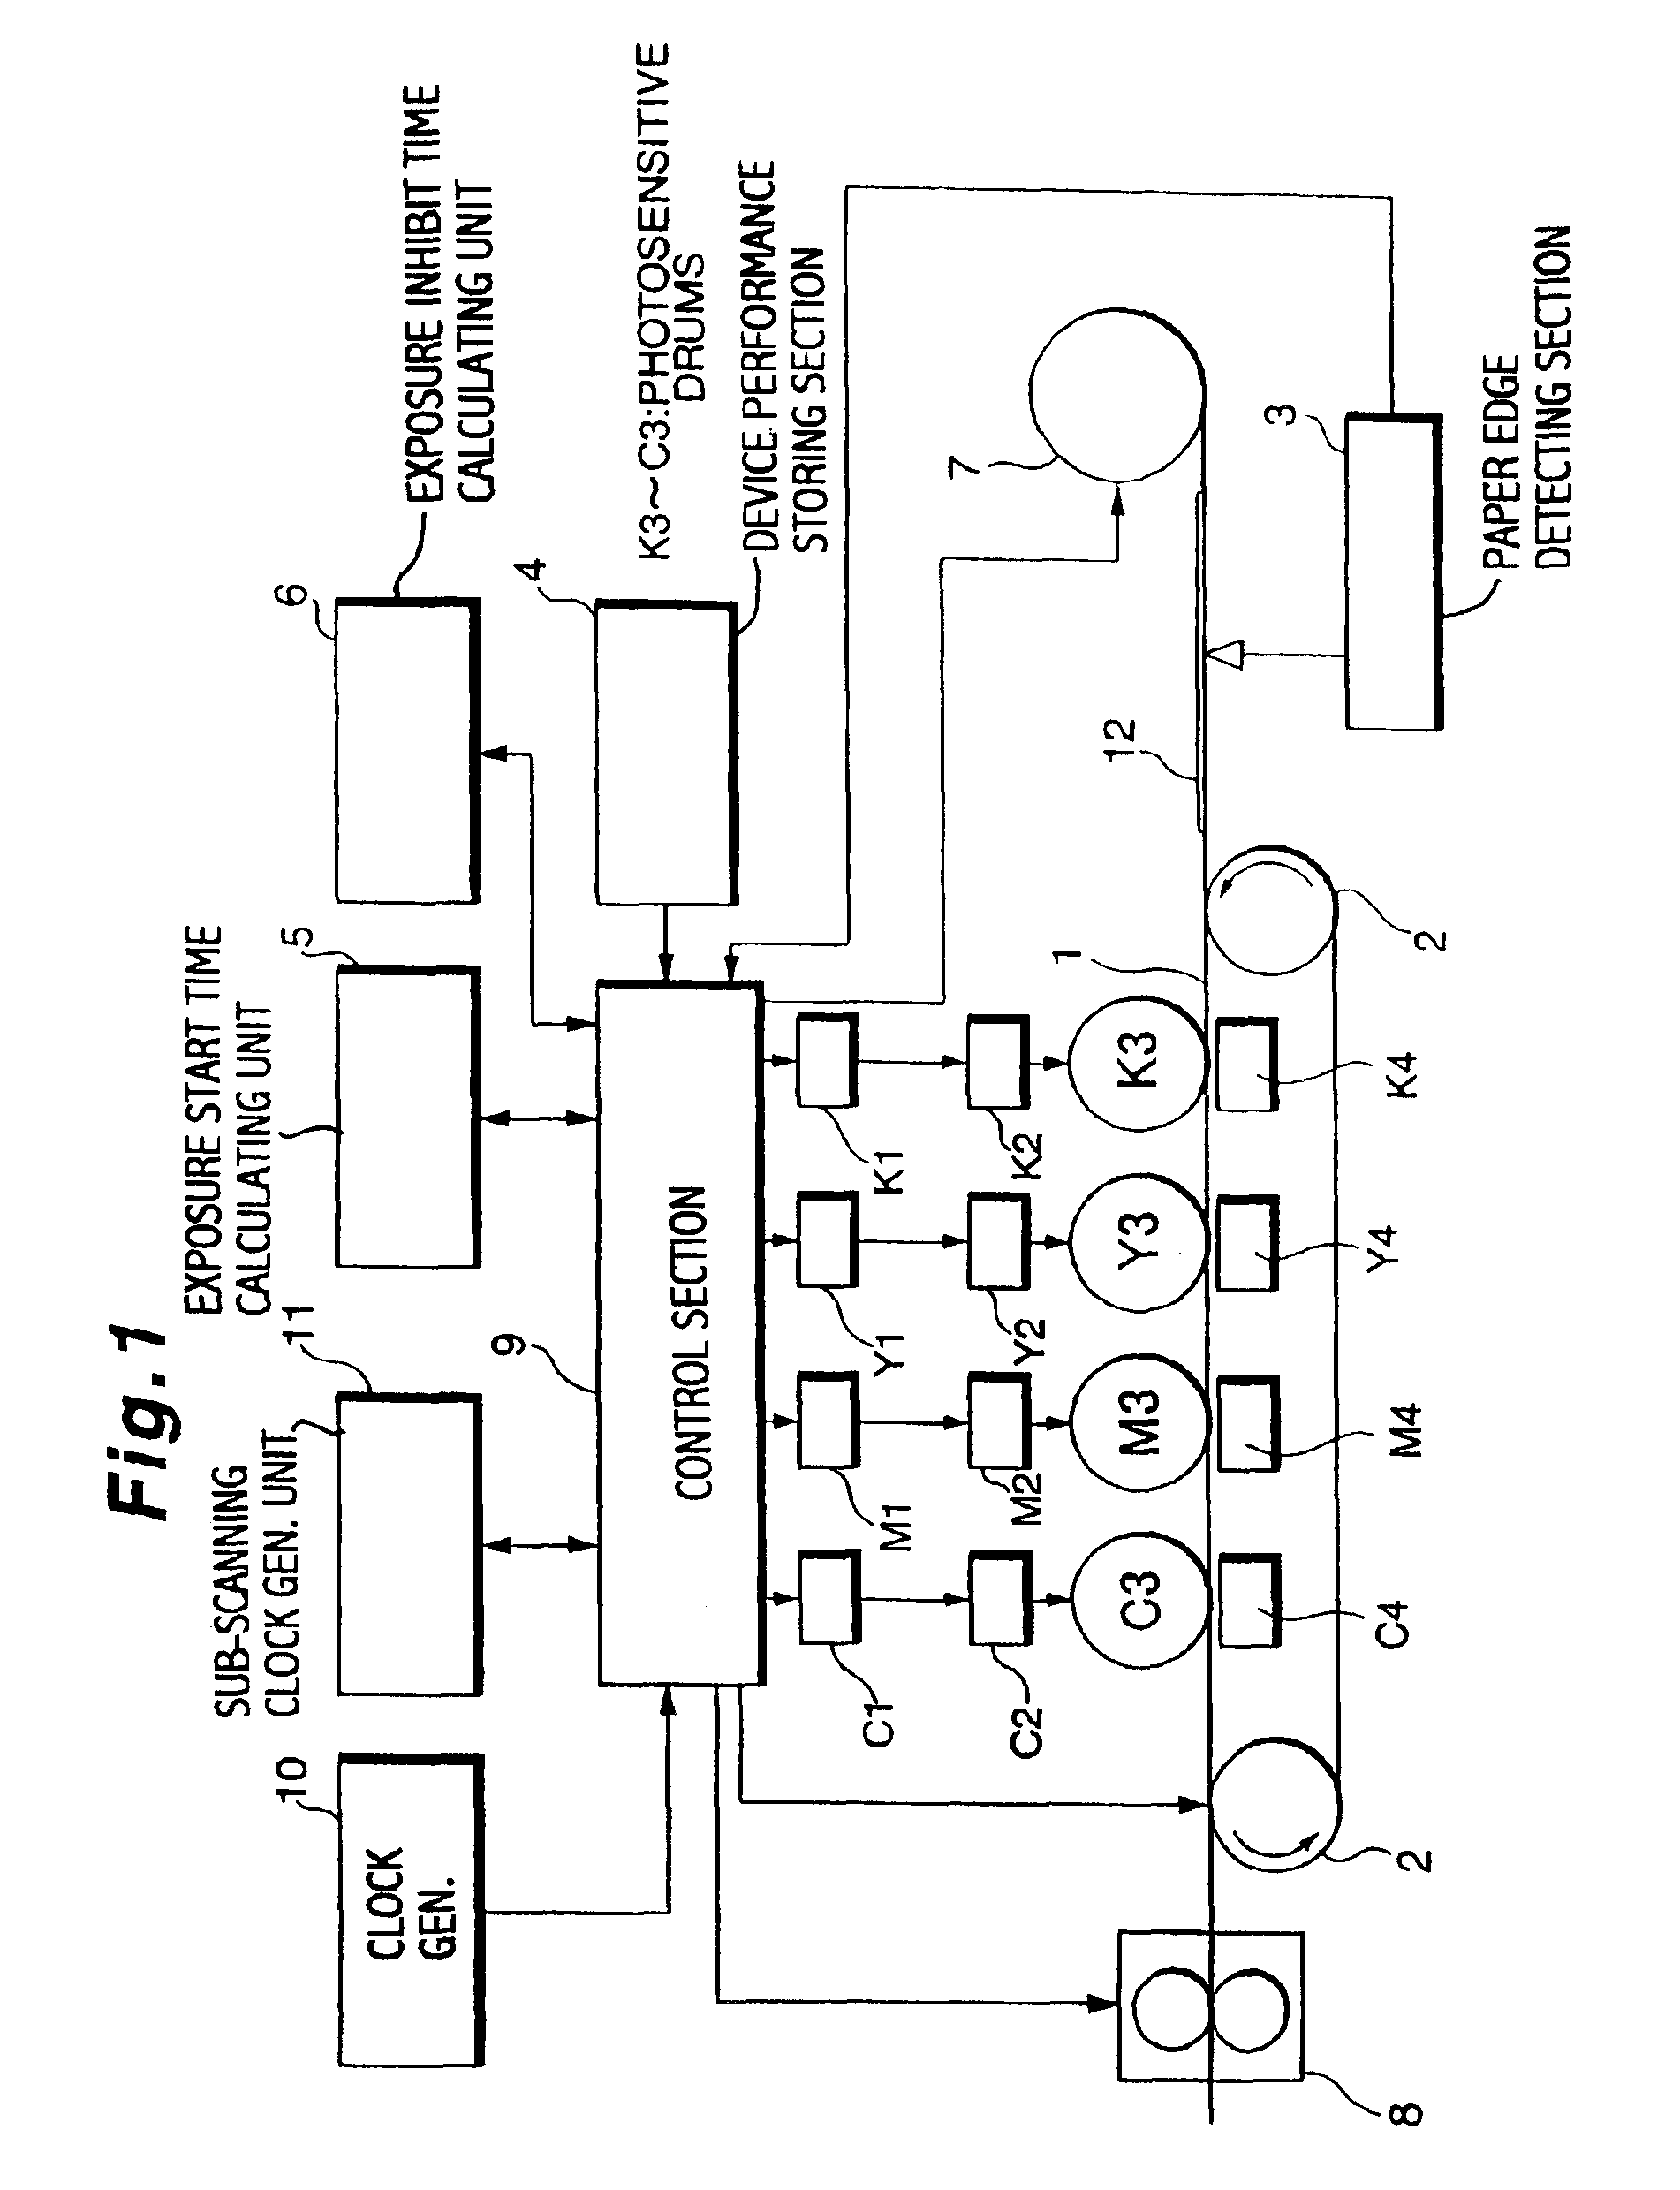 Image forming device customizing the image to fit the paper length